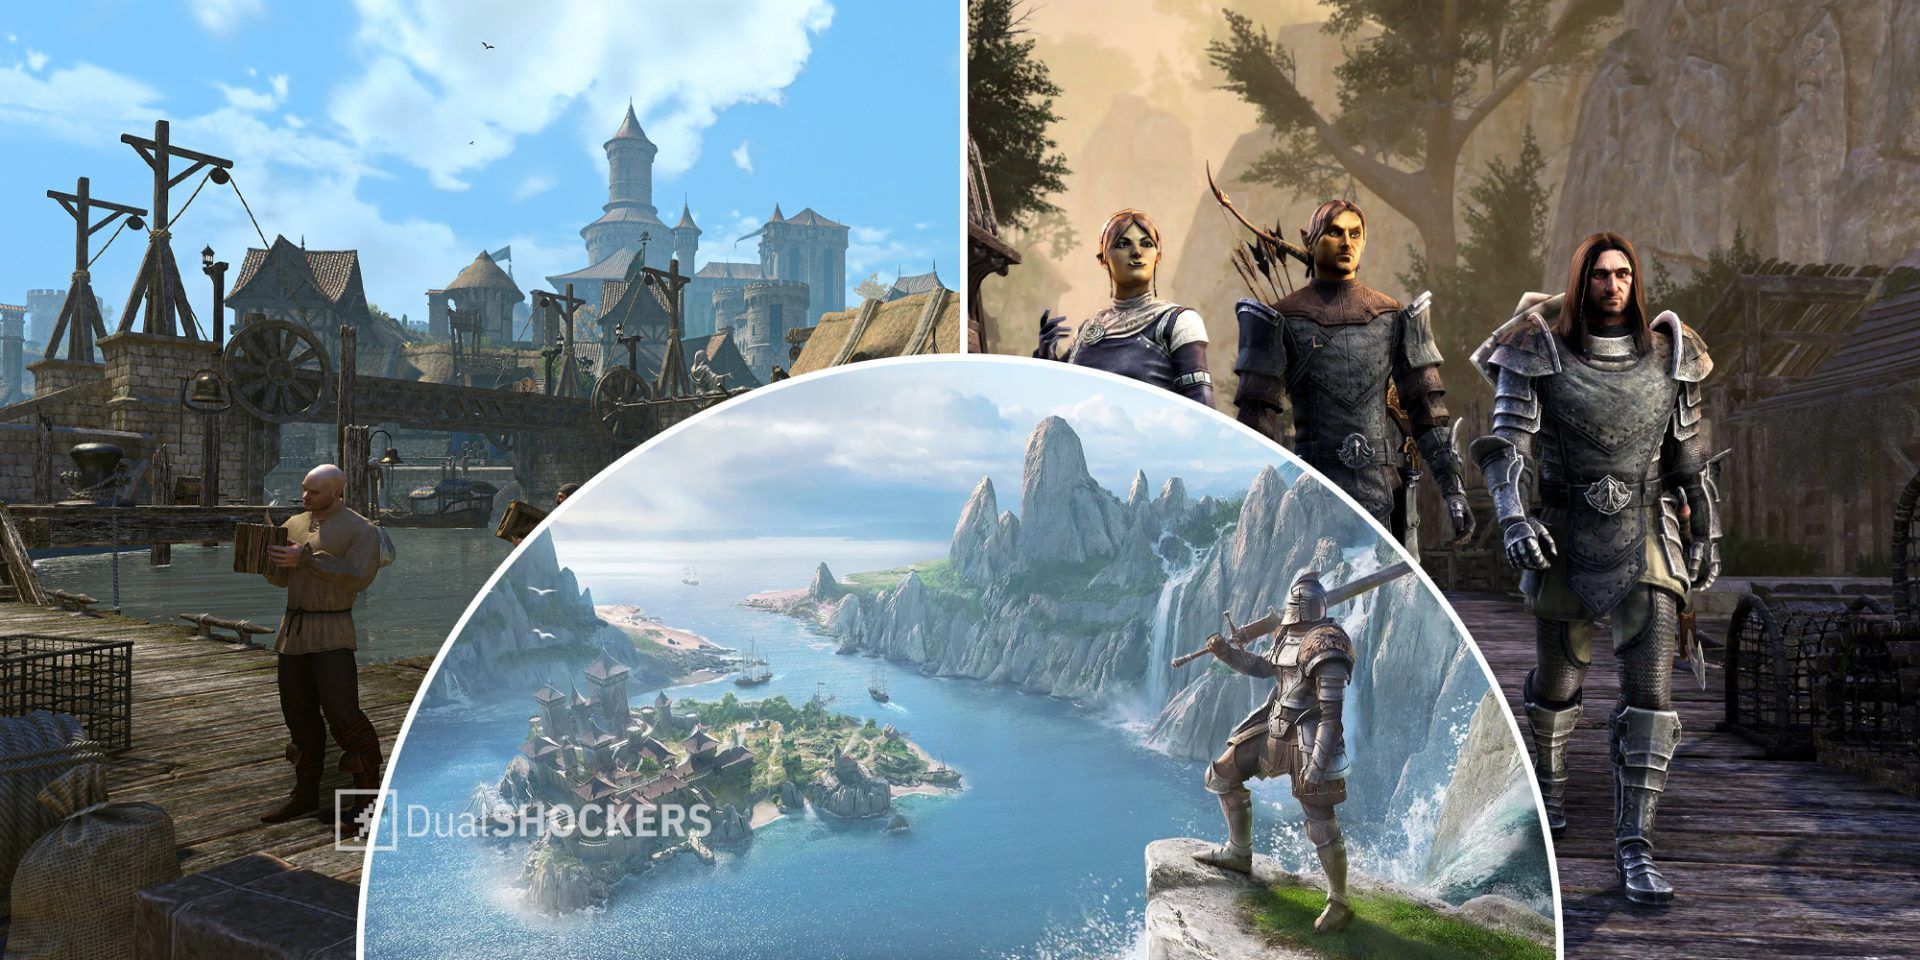 ESO Morrowind Update v3.0.0 Patch Notes Revealed